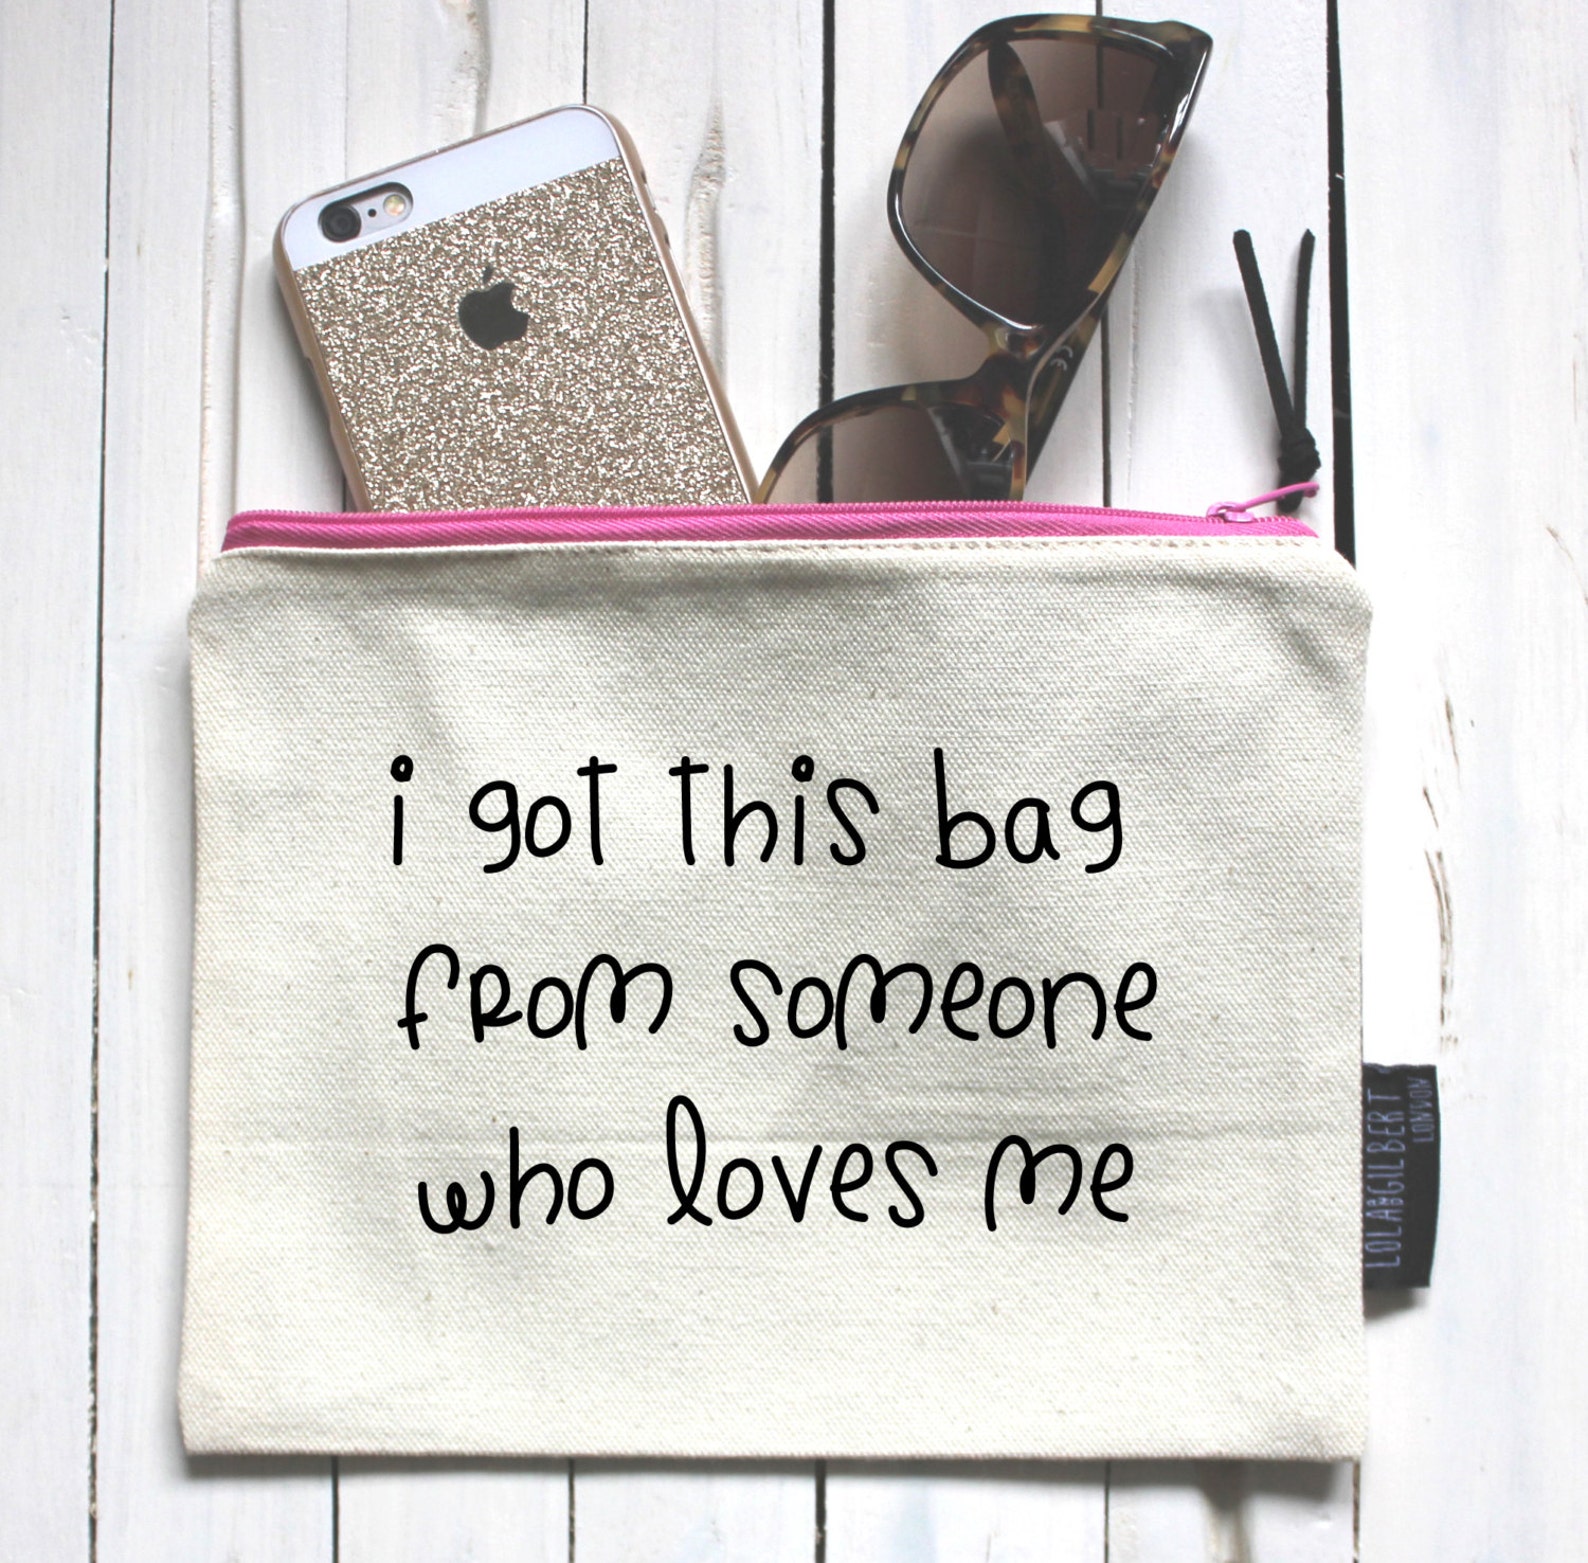 This bag is for. Whose Bag is this. Clean up your Purse..